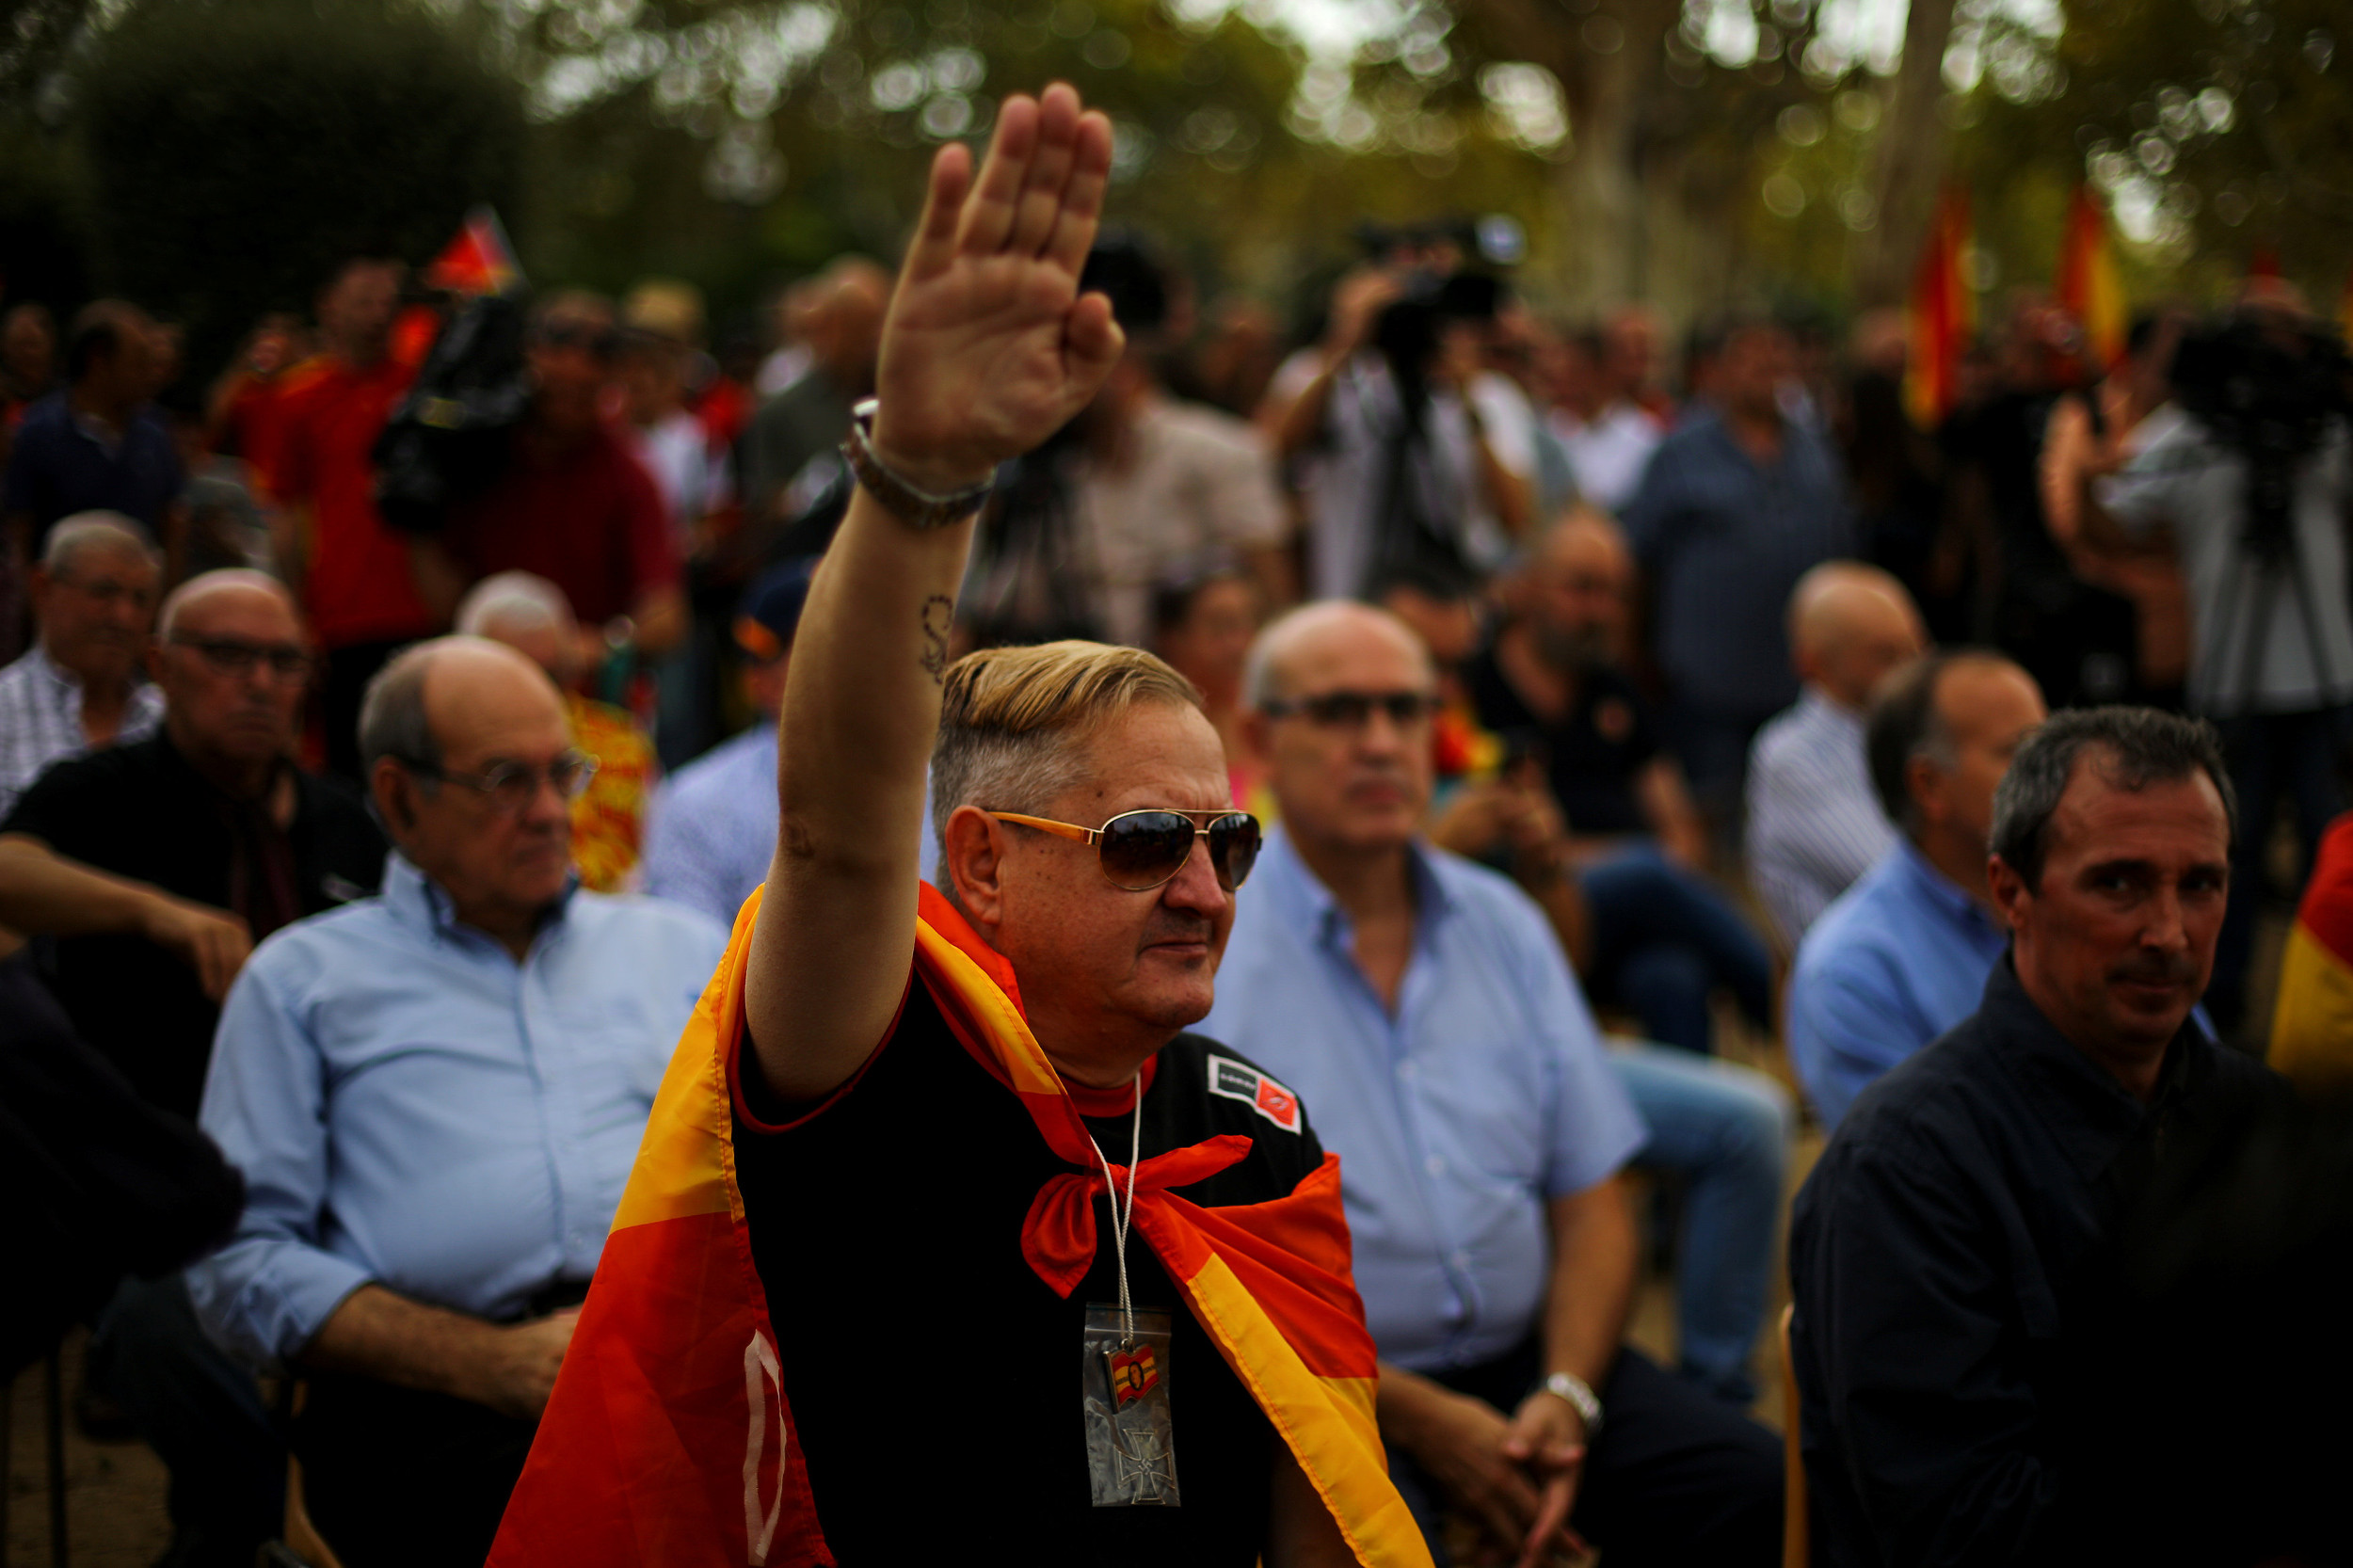 A far-right protester raises arm in Nazi salute on Spain's national day (by ACN)